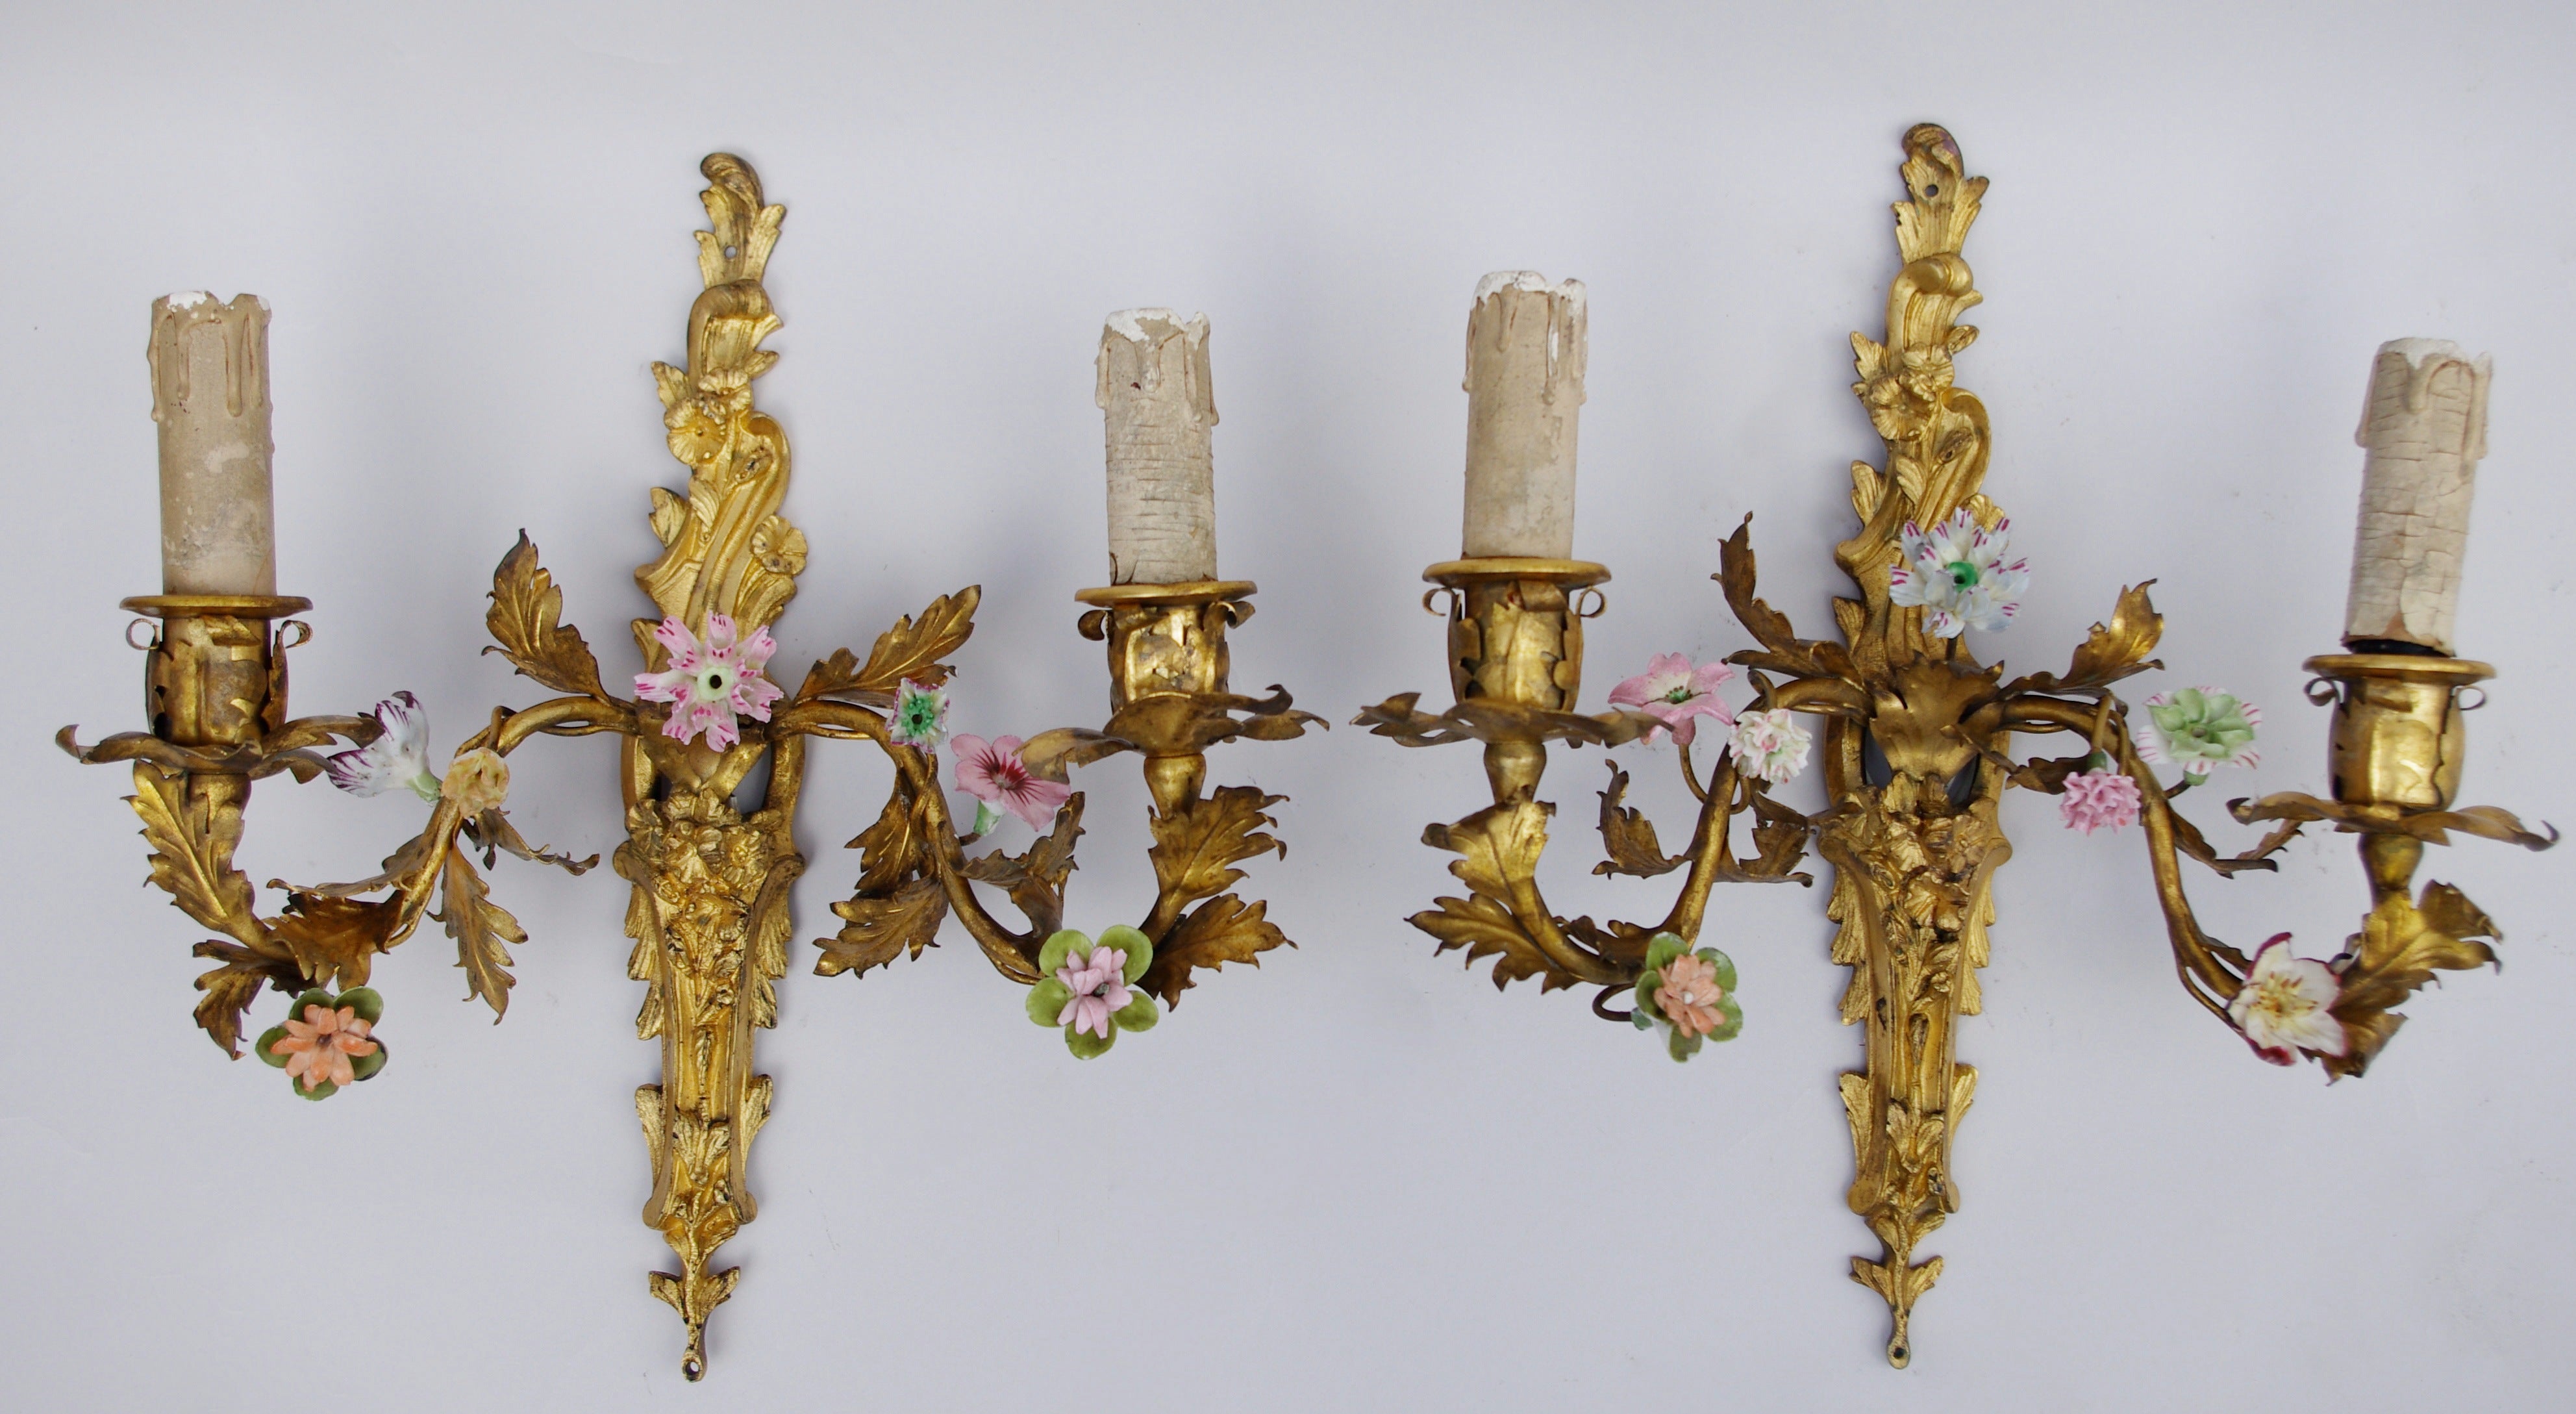 Pair of Louis XV Style Pair of Sconces with Porcelain Flowers, circa 1900